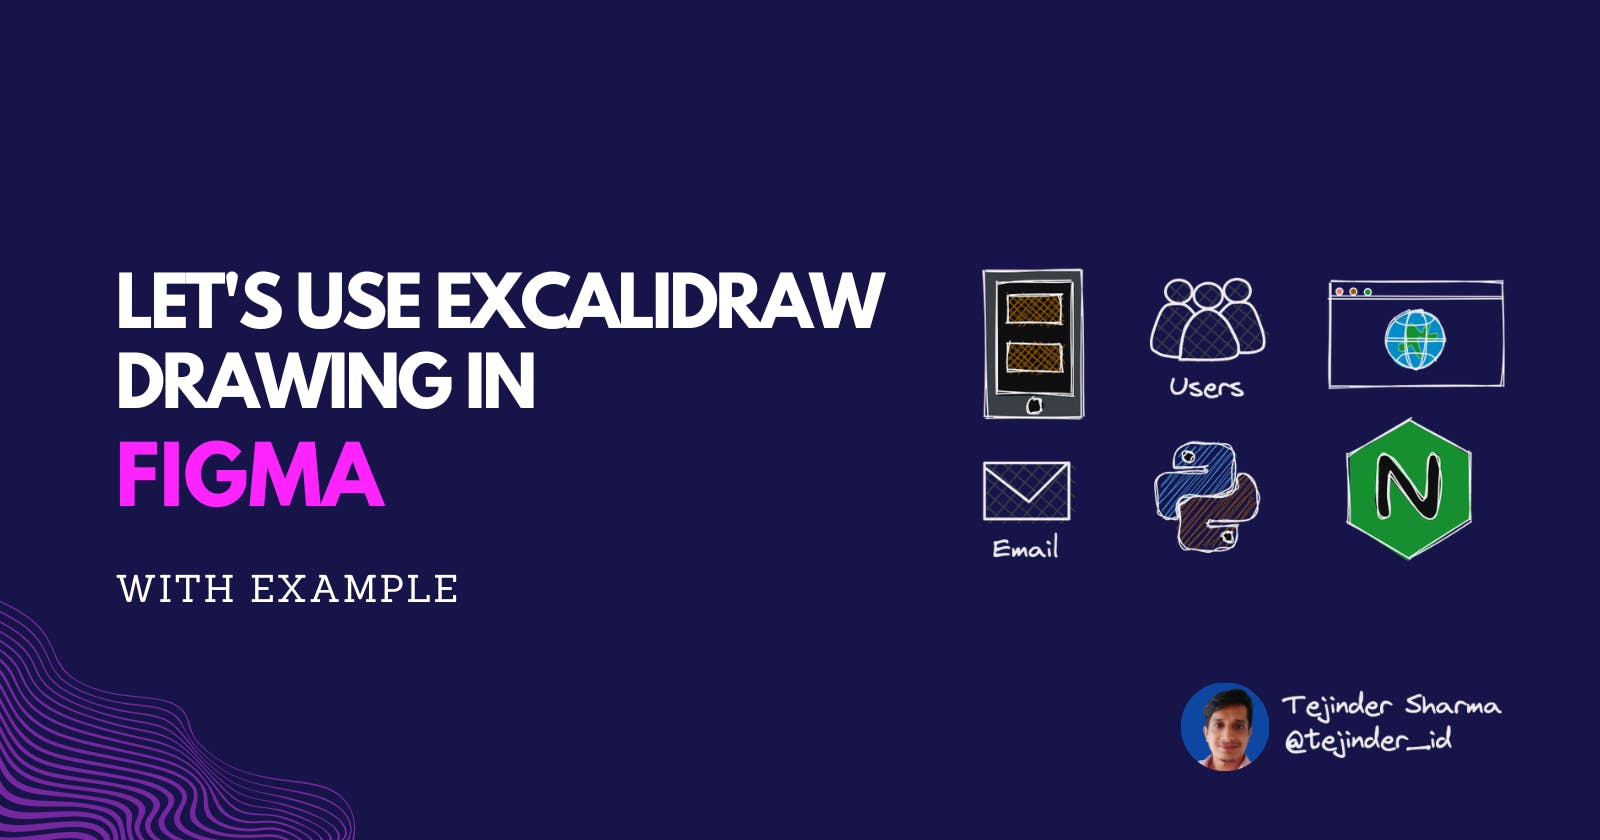 What is an Excalidraw? How to use the Excalidraw drawing in Figma?